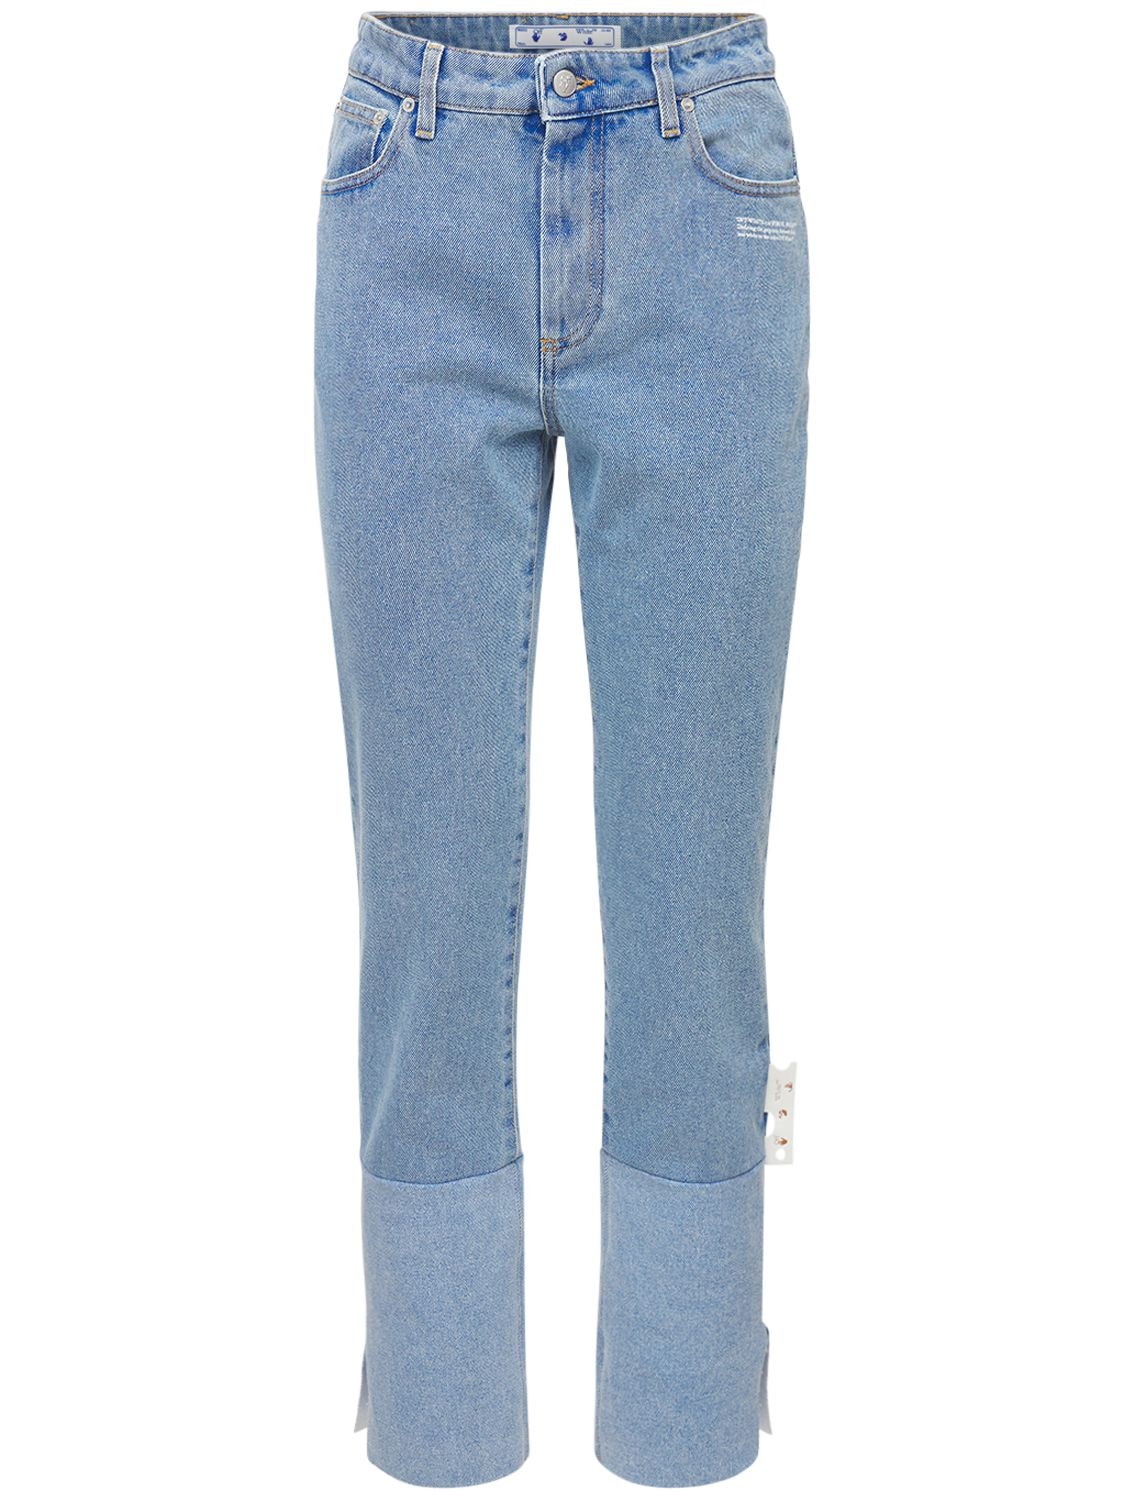 Off-White Cottons TWO TONE STRAIGHT LEG JEANS